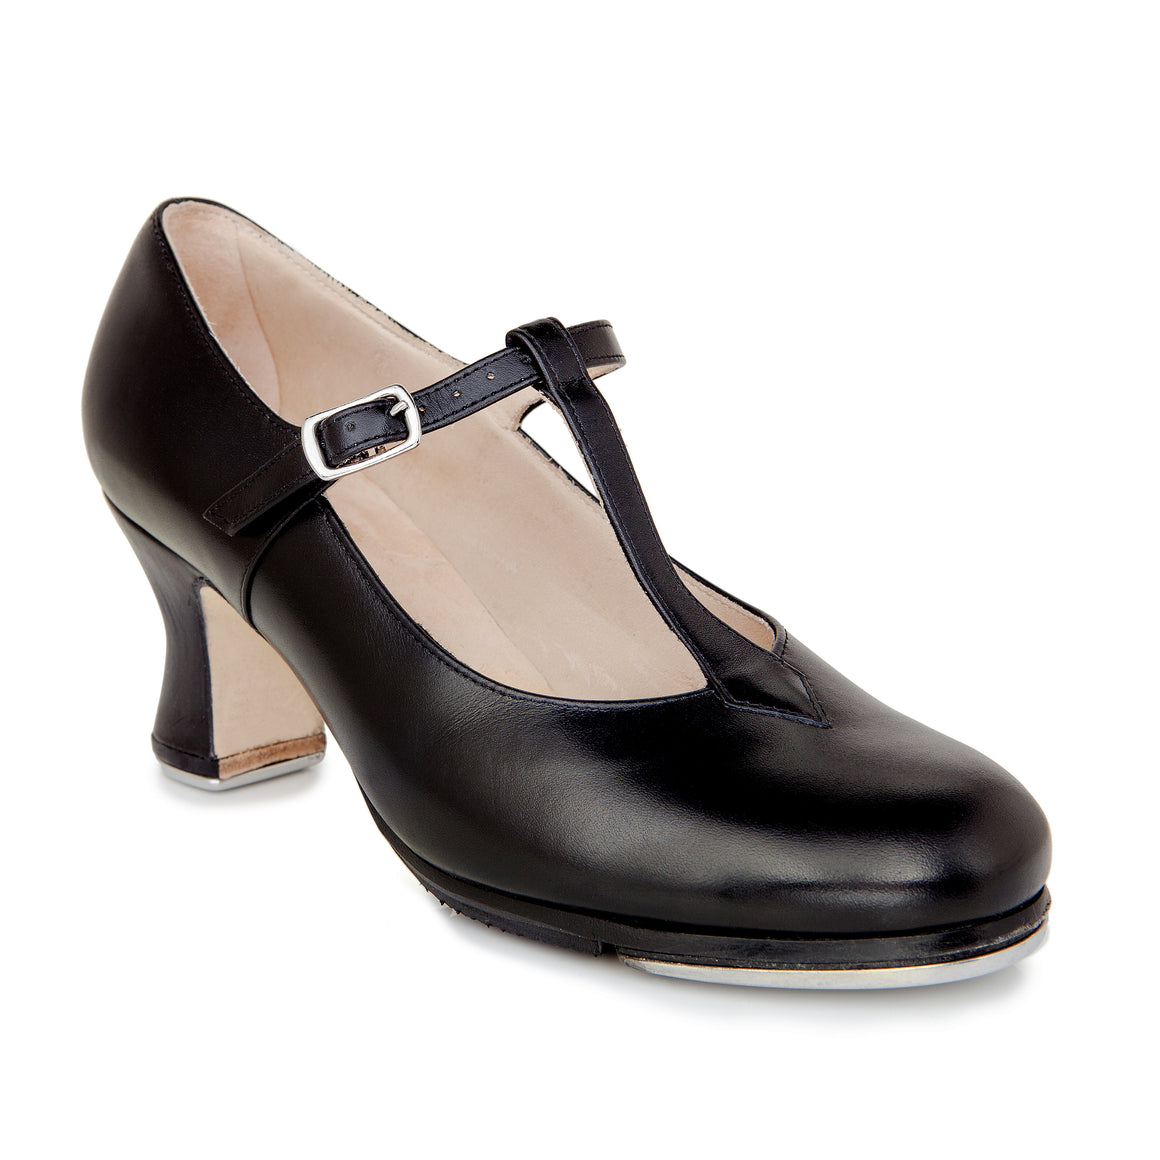 laduca tap shoes used